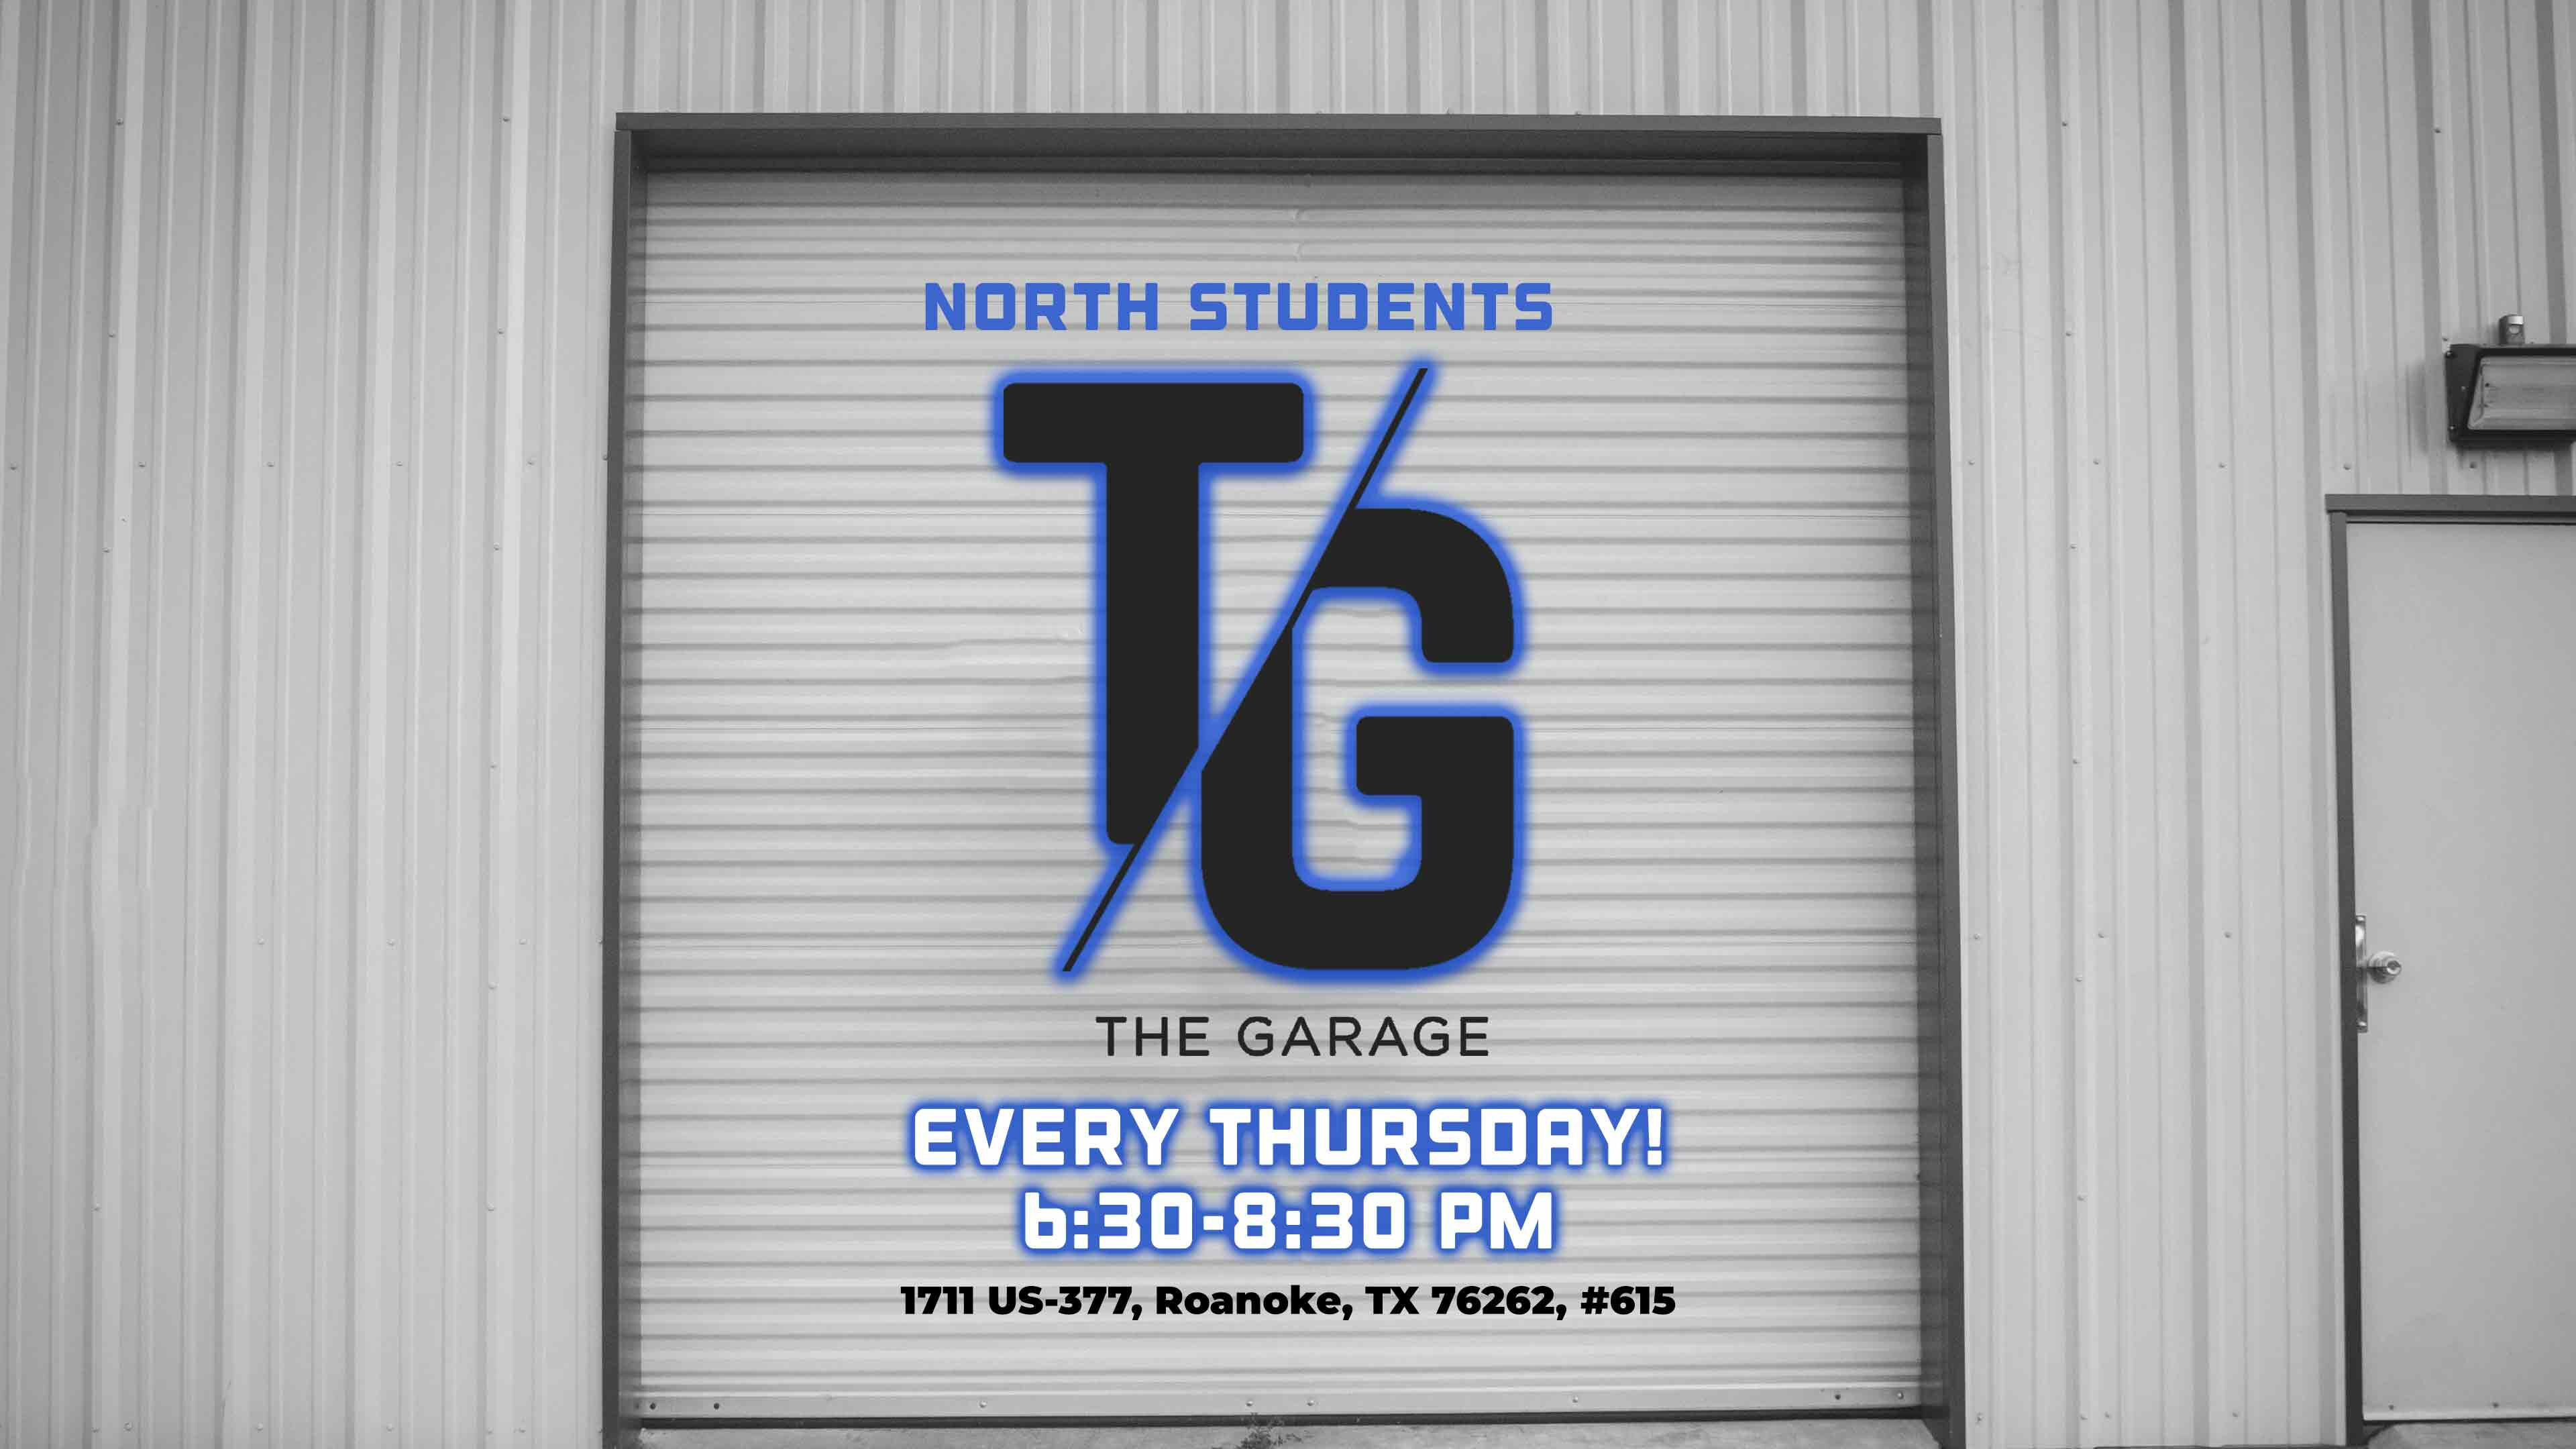 North Student Ministry: The Garage